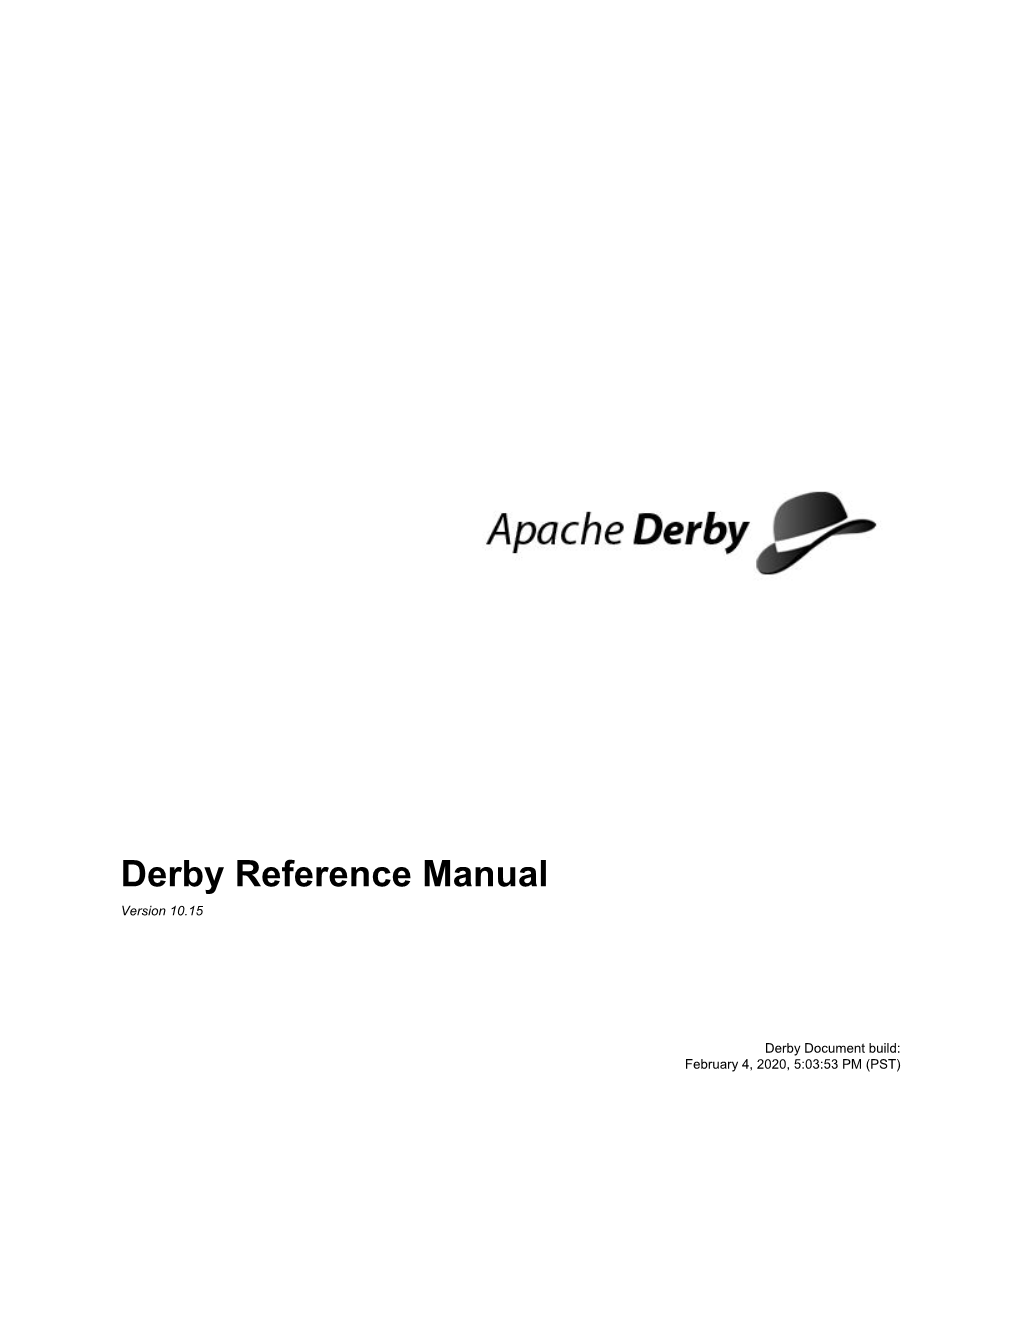 Derby Reference Manual Version 10.15